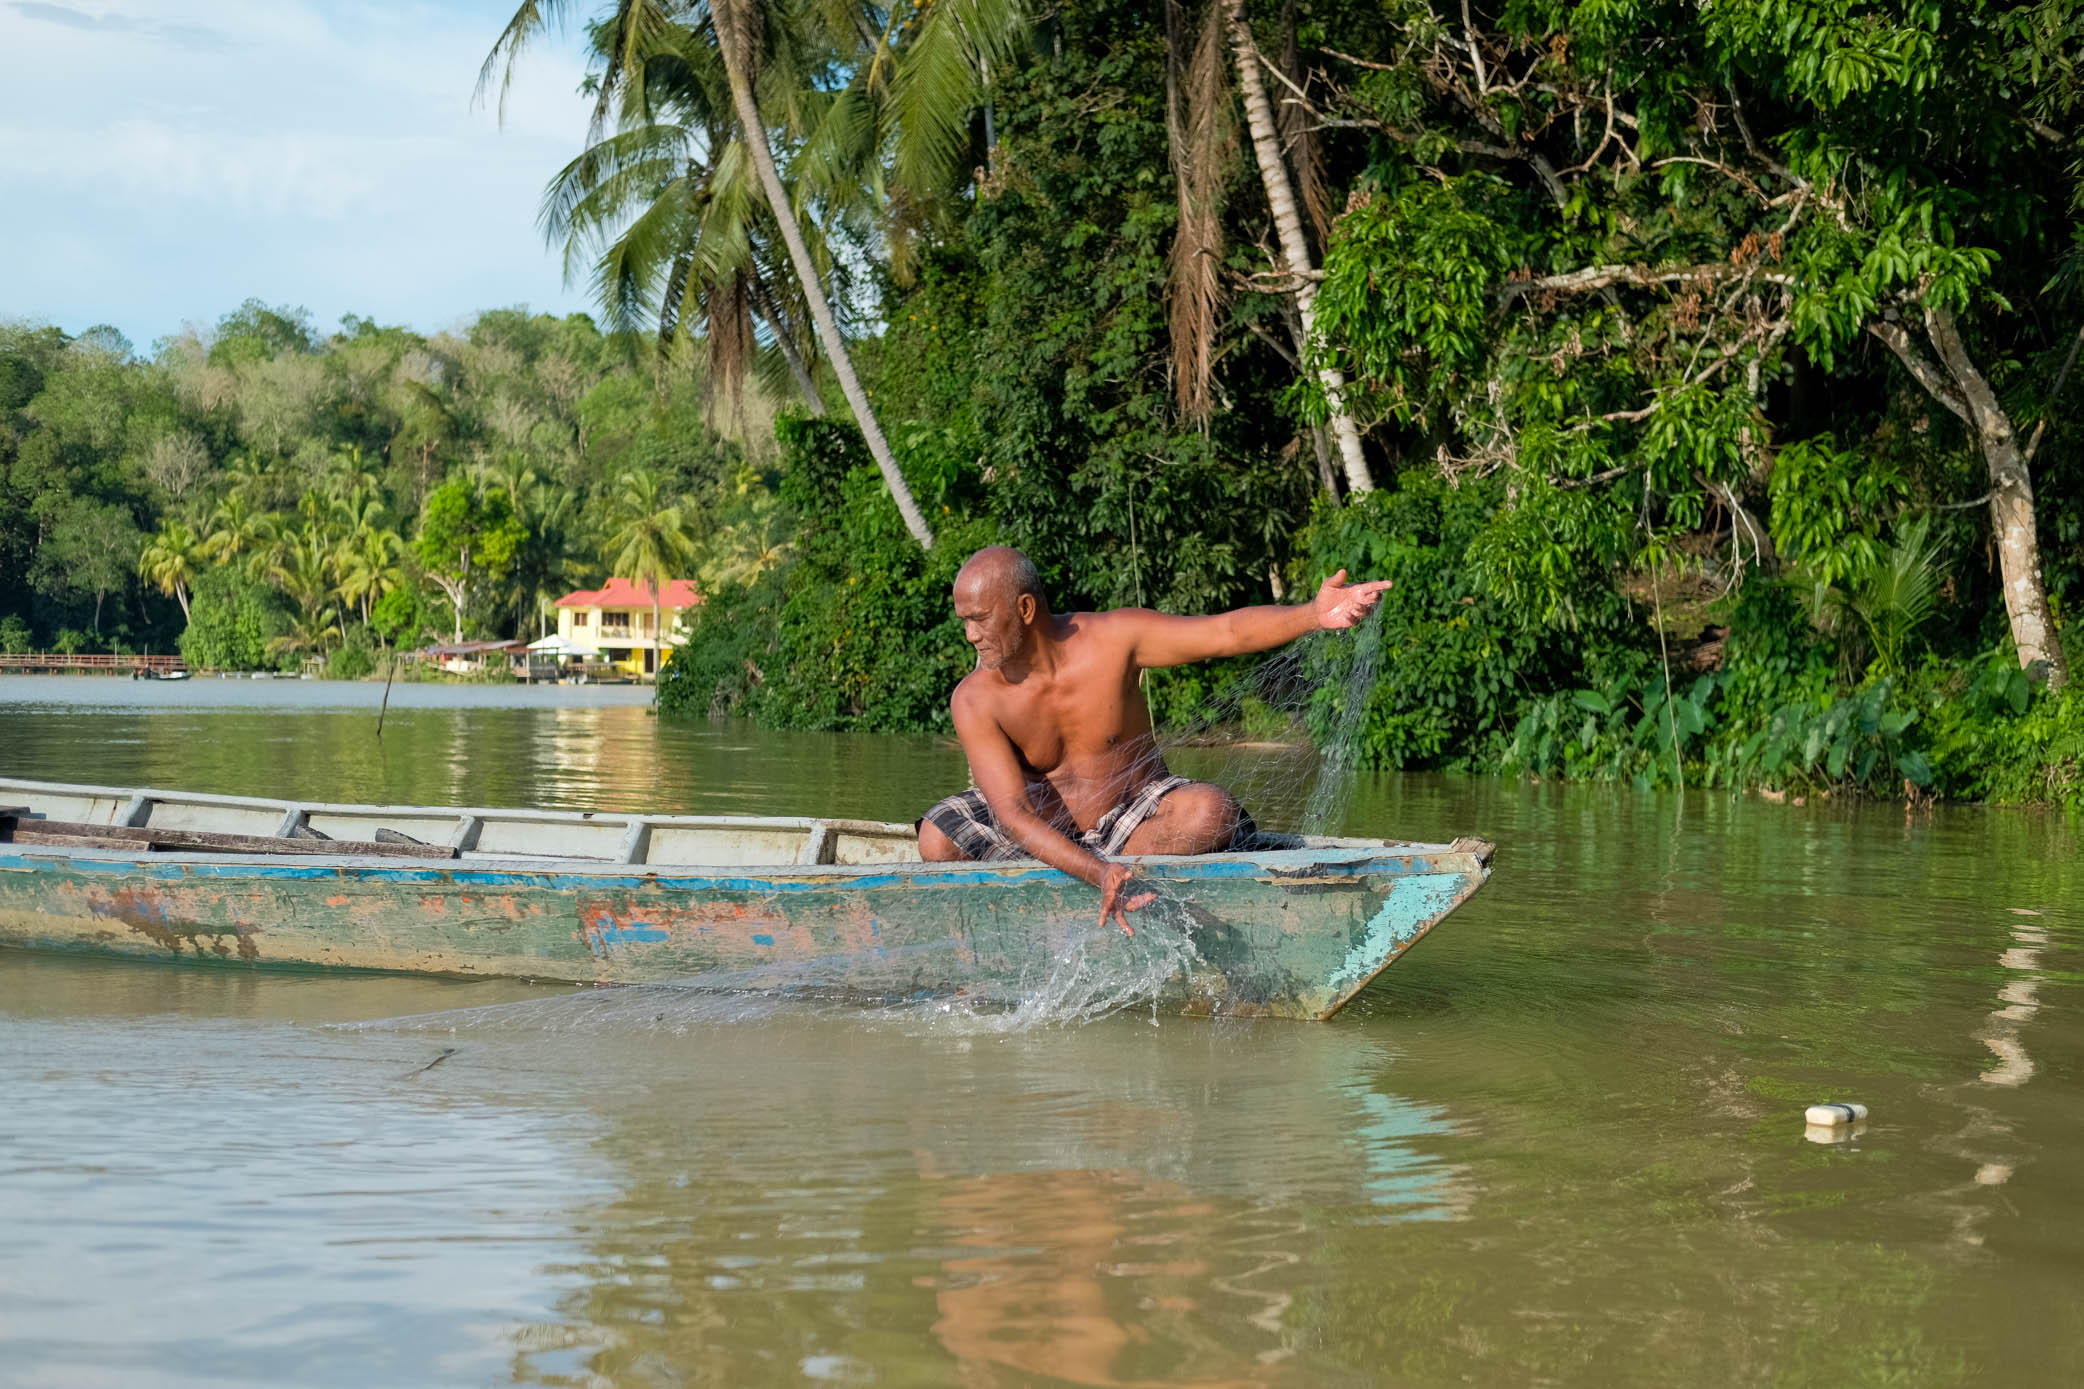 The fishermen of Tasik Chenderoh care for the cleanliness and health of their waters, as it serves as their livelihoods and communities. Photo by Ansell Tan